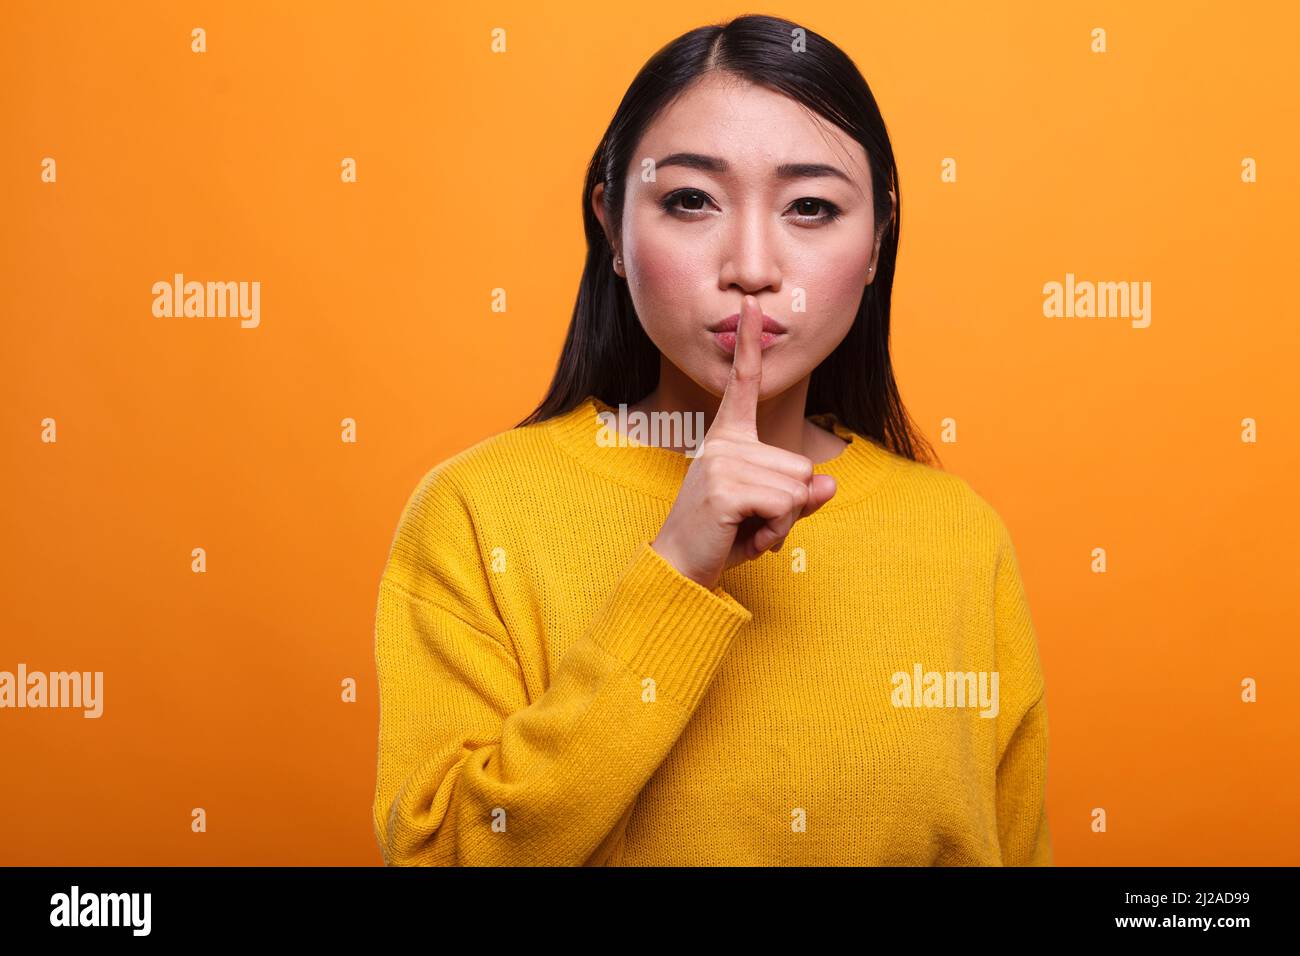 Calm attractive women wearing yellow sweater making hush gesture with forefinger on orange background. Mysterious person touching lips with index finger indicating silence and secrecy. Stock Photo